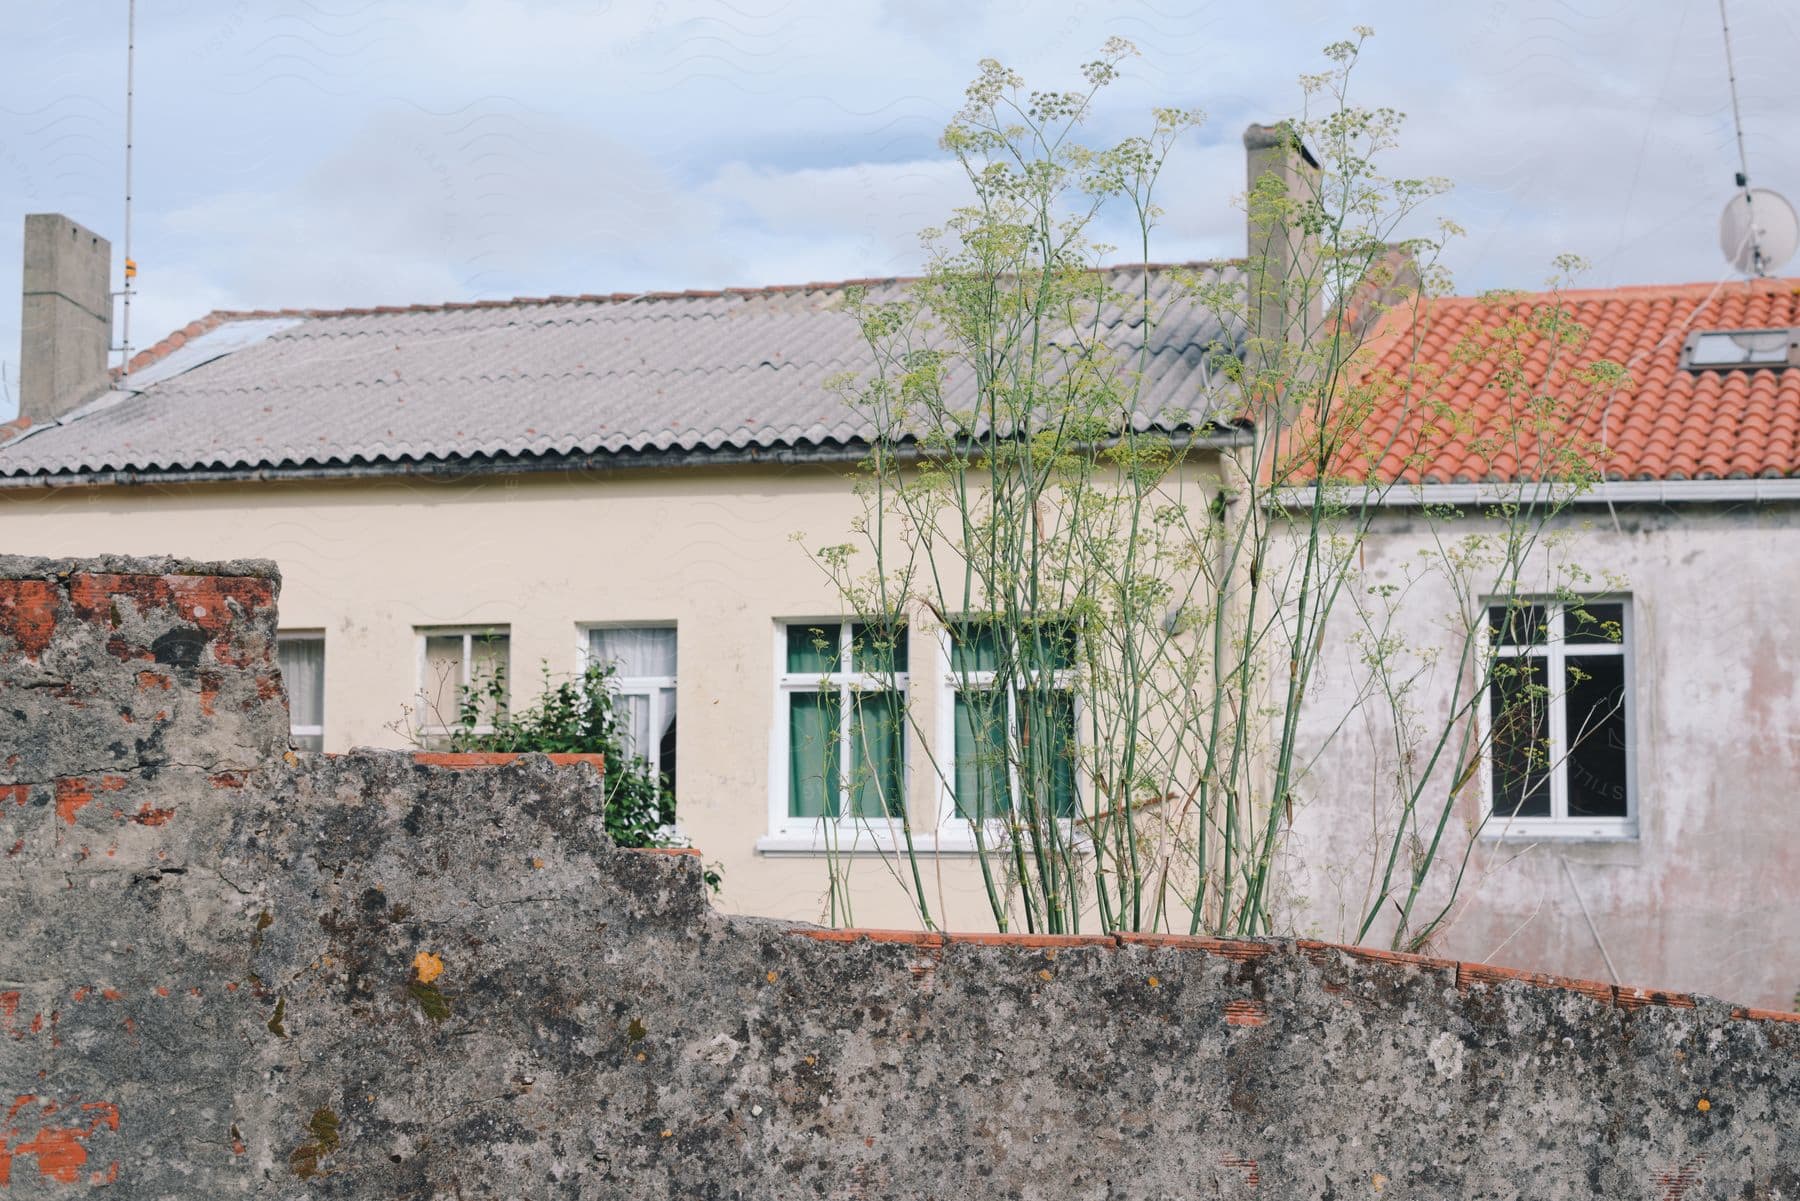 A weathered wall with overgrown green plants and houses with a cloudy sky in the background